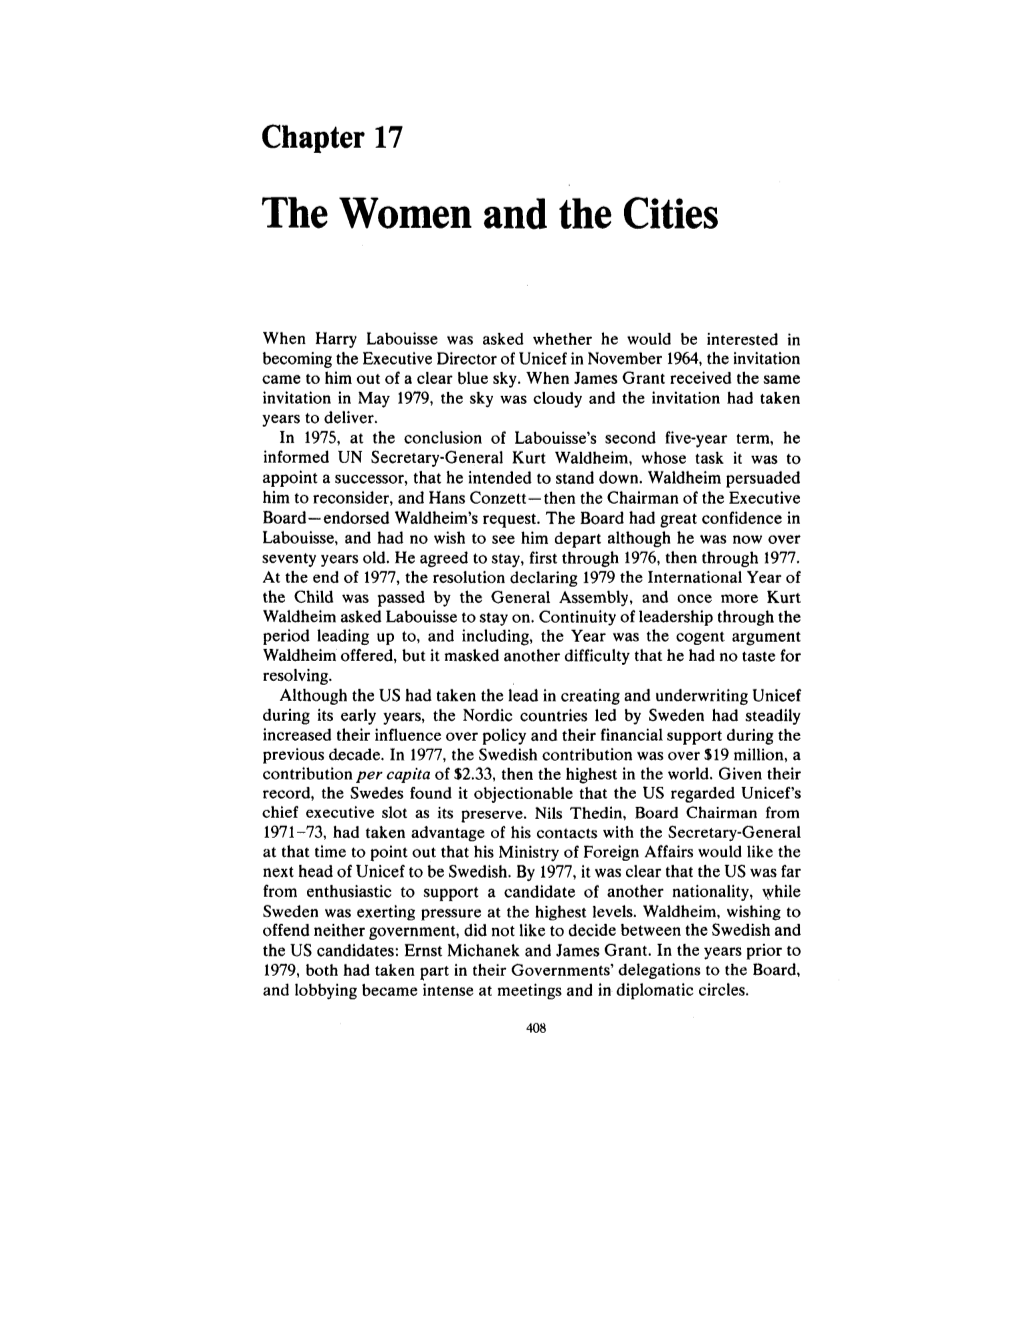 The Women and the Cities